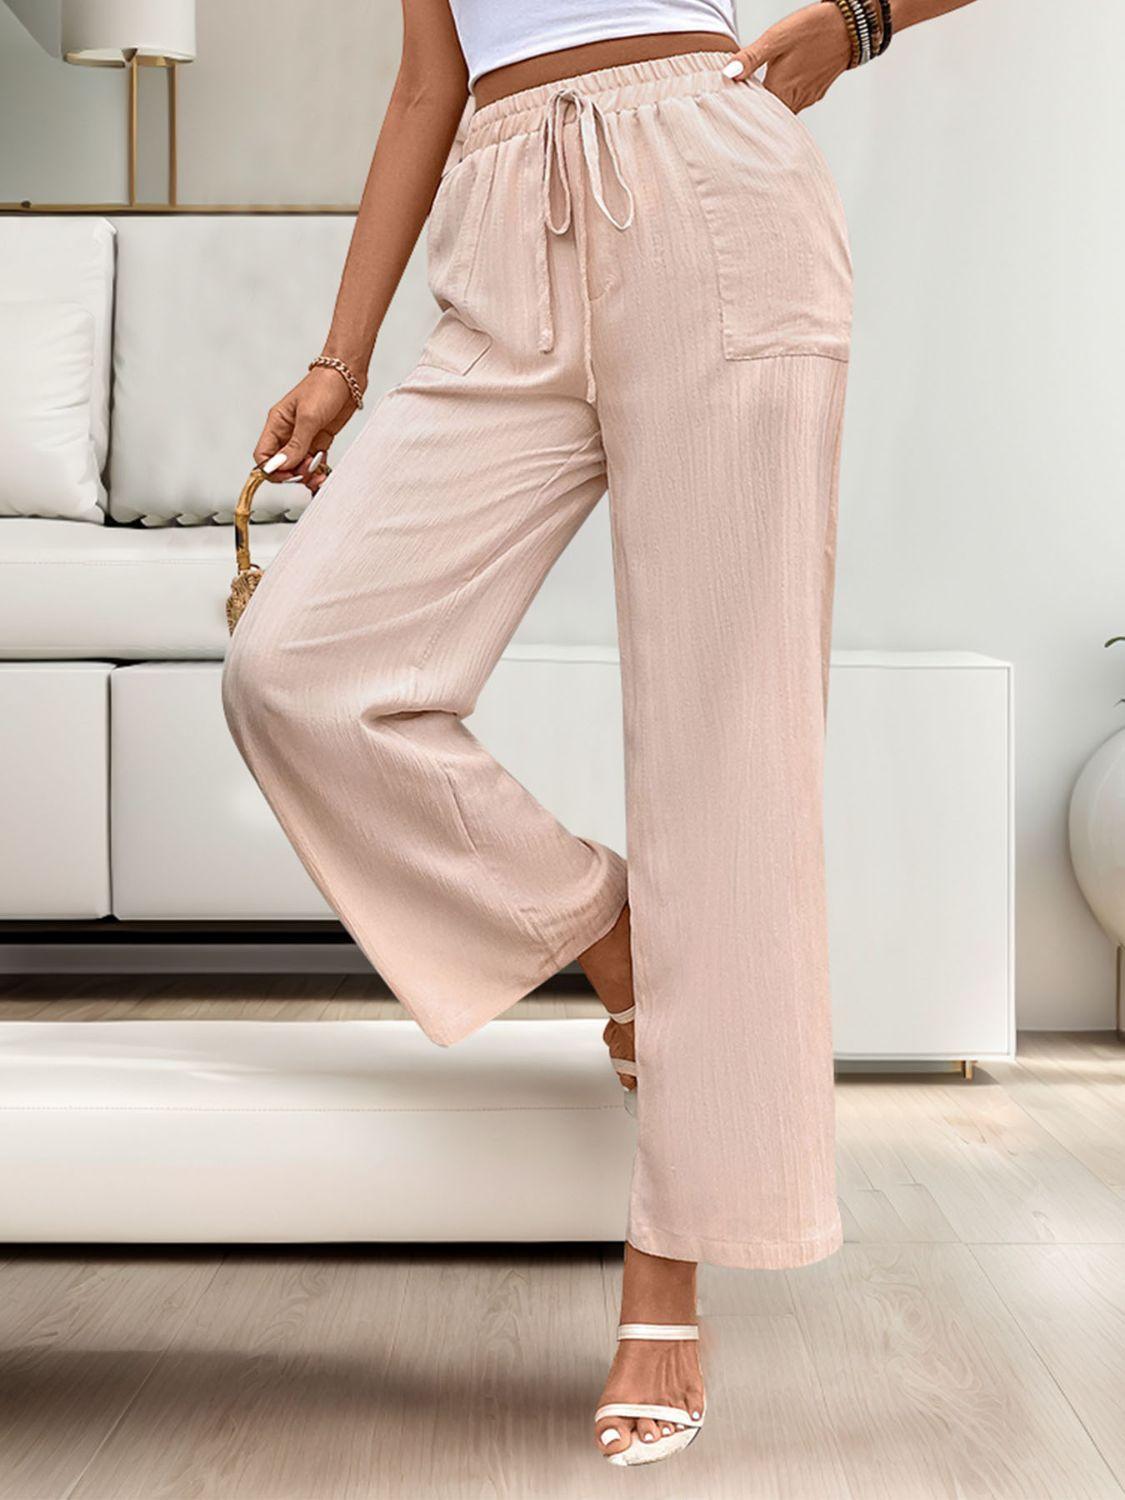 Women's Pants Tied Wide Leg Pants with Pockets